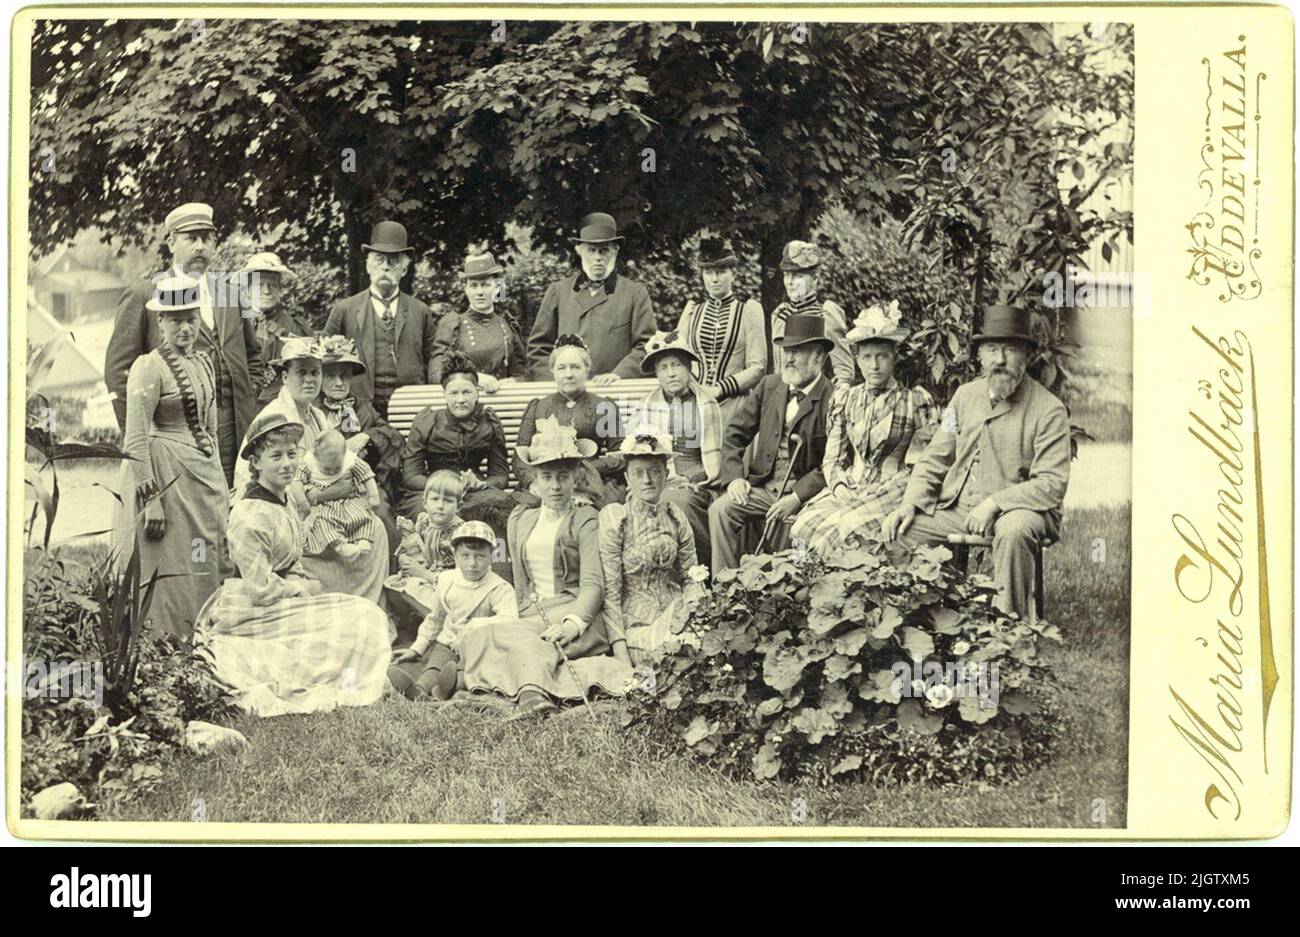 Text in gold on the front of the photo: 'Maria Lundbäck. Uddevalla.' Written text on the back: 'Summer 1891. Mayor Radhe, Mrs. Radhe, Olga Radhe, Elsa Radhe, Anna Radhe, Archbishop Anton Niklas Sundberg, Mrs. Sundberg, Prof. Berglind, Mrs. Berglind, Olga Berglind, Carry (?) Öhman. Rev. secr. Reuterswaard, Mrs. Reuterswaard. ”A group of well -dressed people in a garden. Some sit on a bench, some sit on the ground and some get up. In front of the company you see two discounts. Photographer Maria Lundbäck was born in Uddevalla where her father was a brewery owner. She learned the photography prof Stock Photo